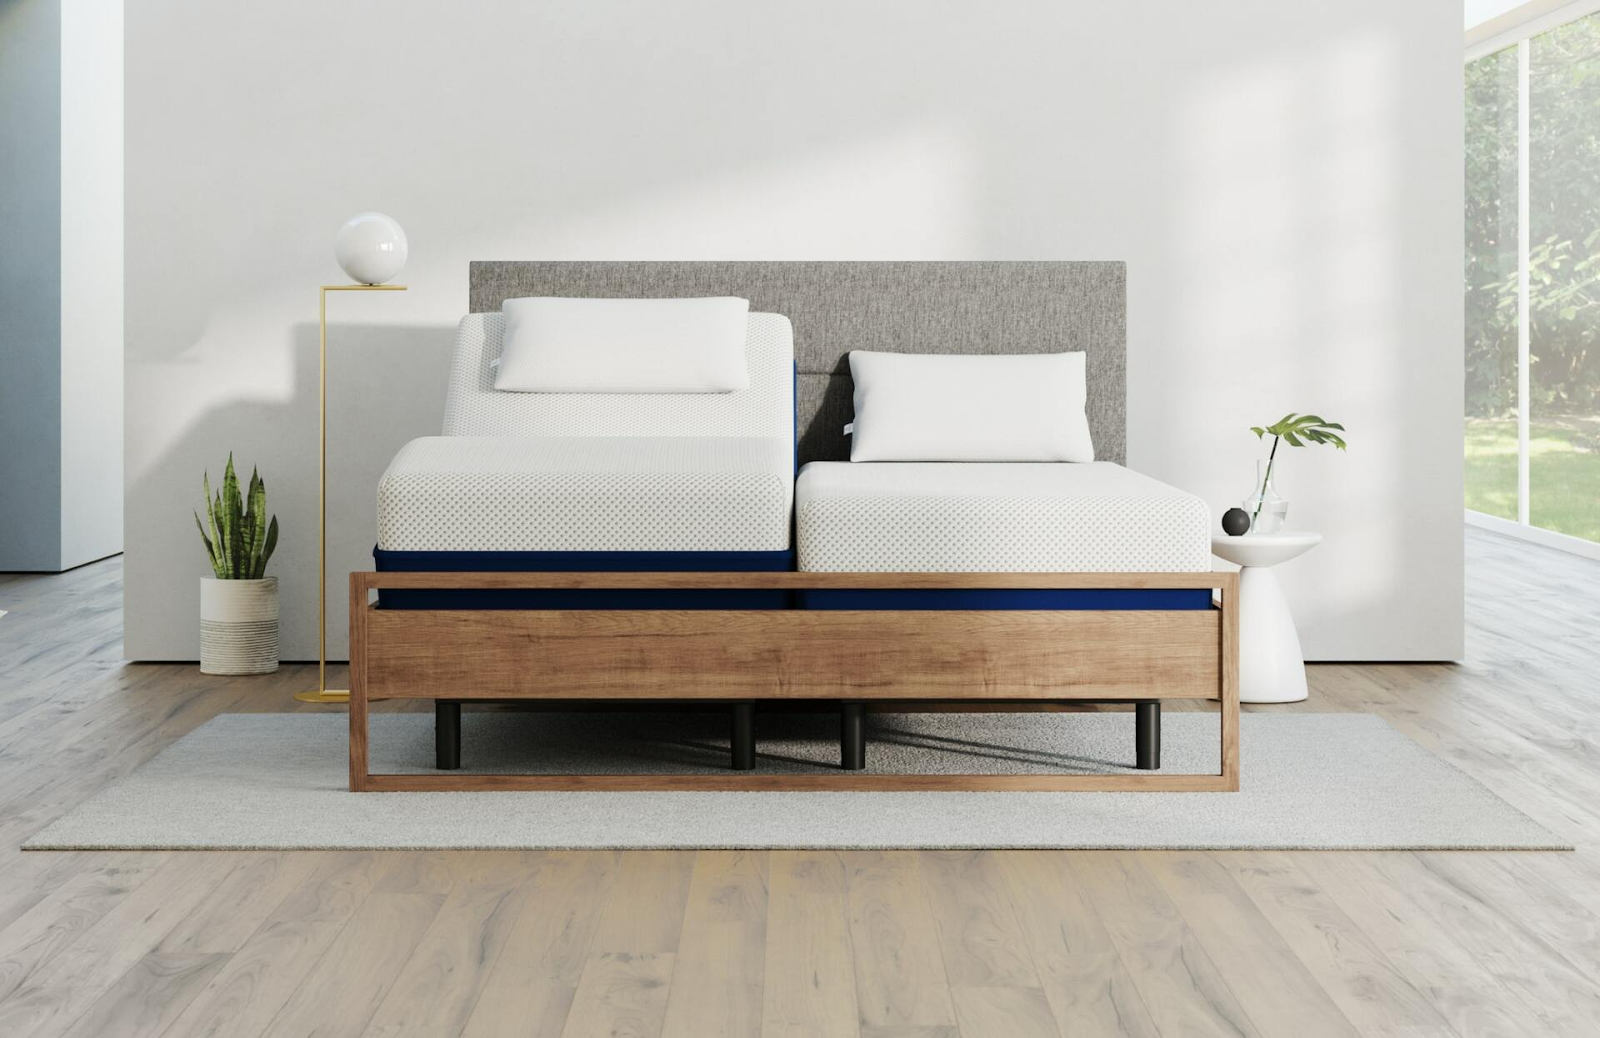 Some adjustable beds come with orthopedic mattresses like this one from Amerisleep 